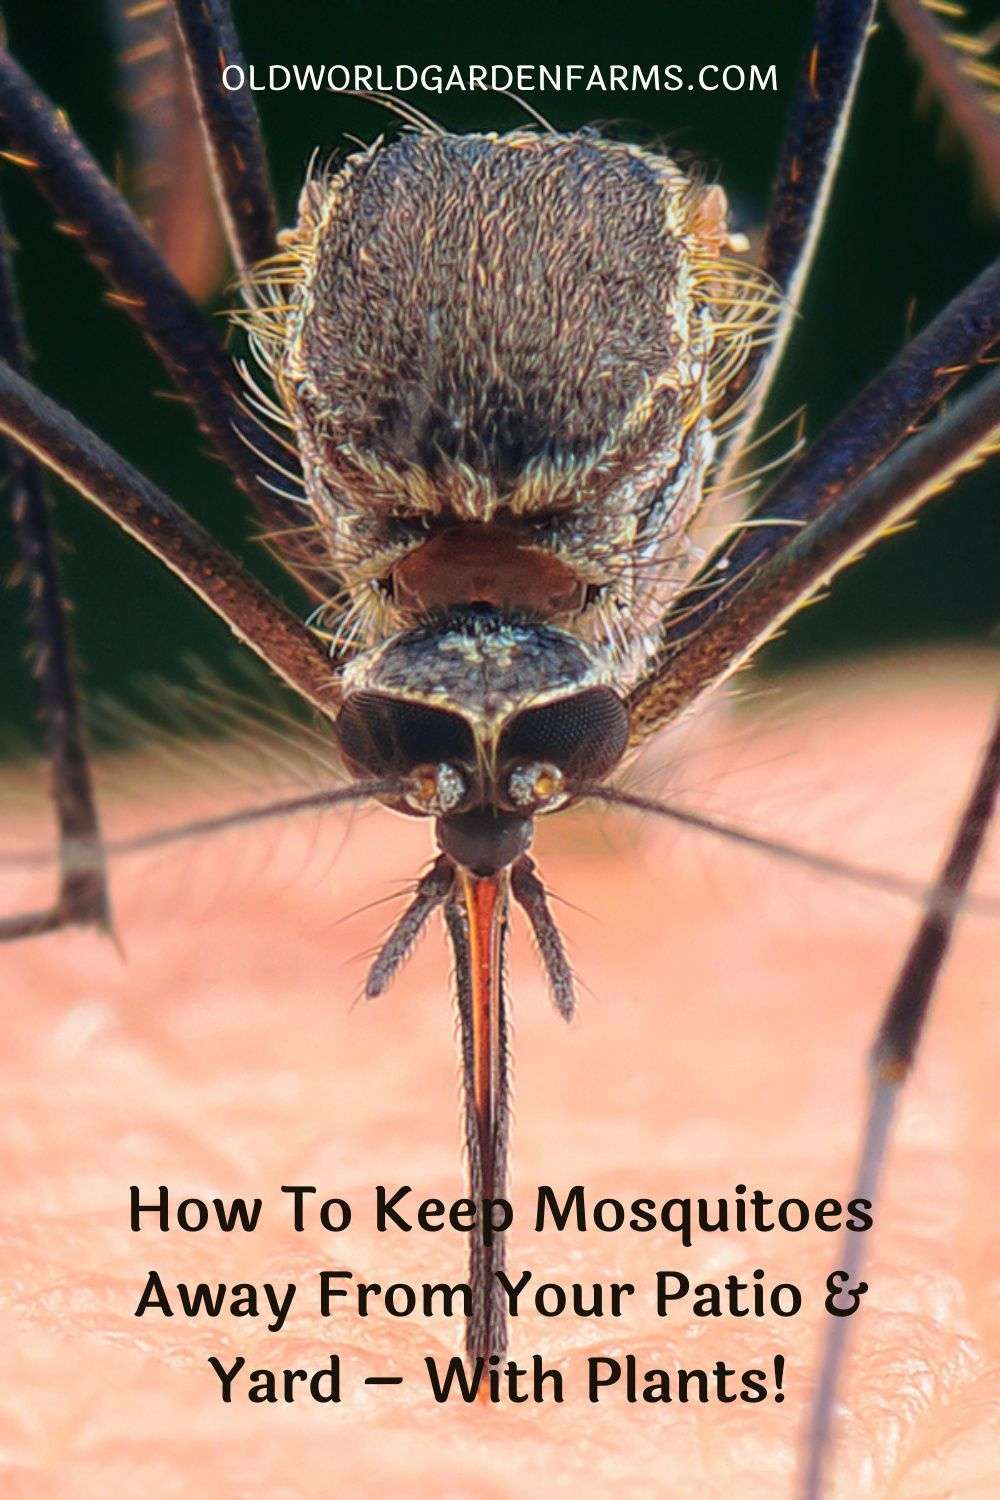 How To Keep Mosquitoes Away From Your Patio & Yard